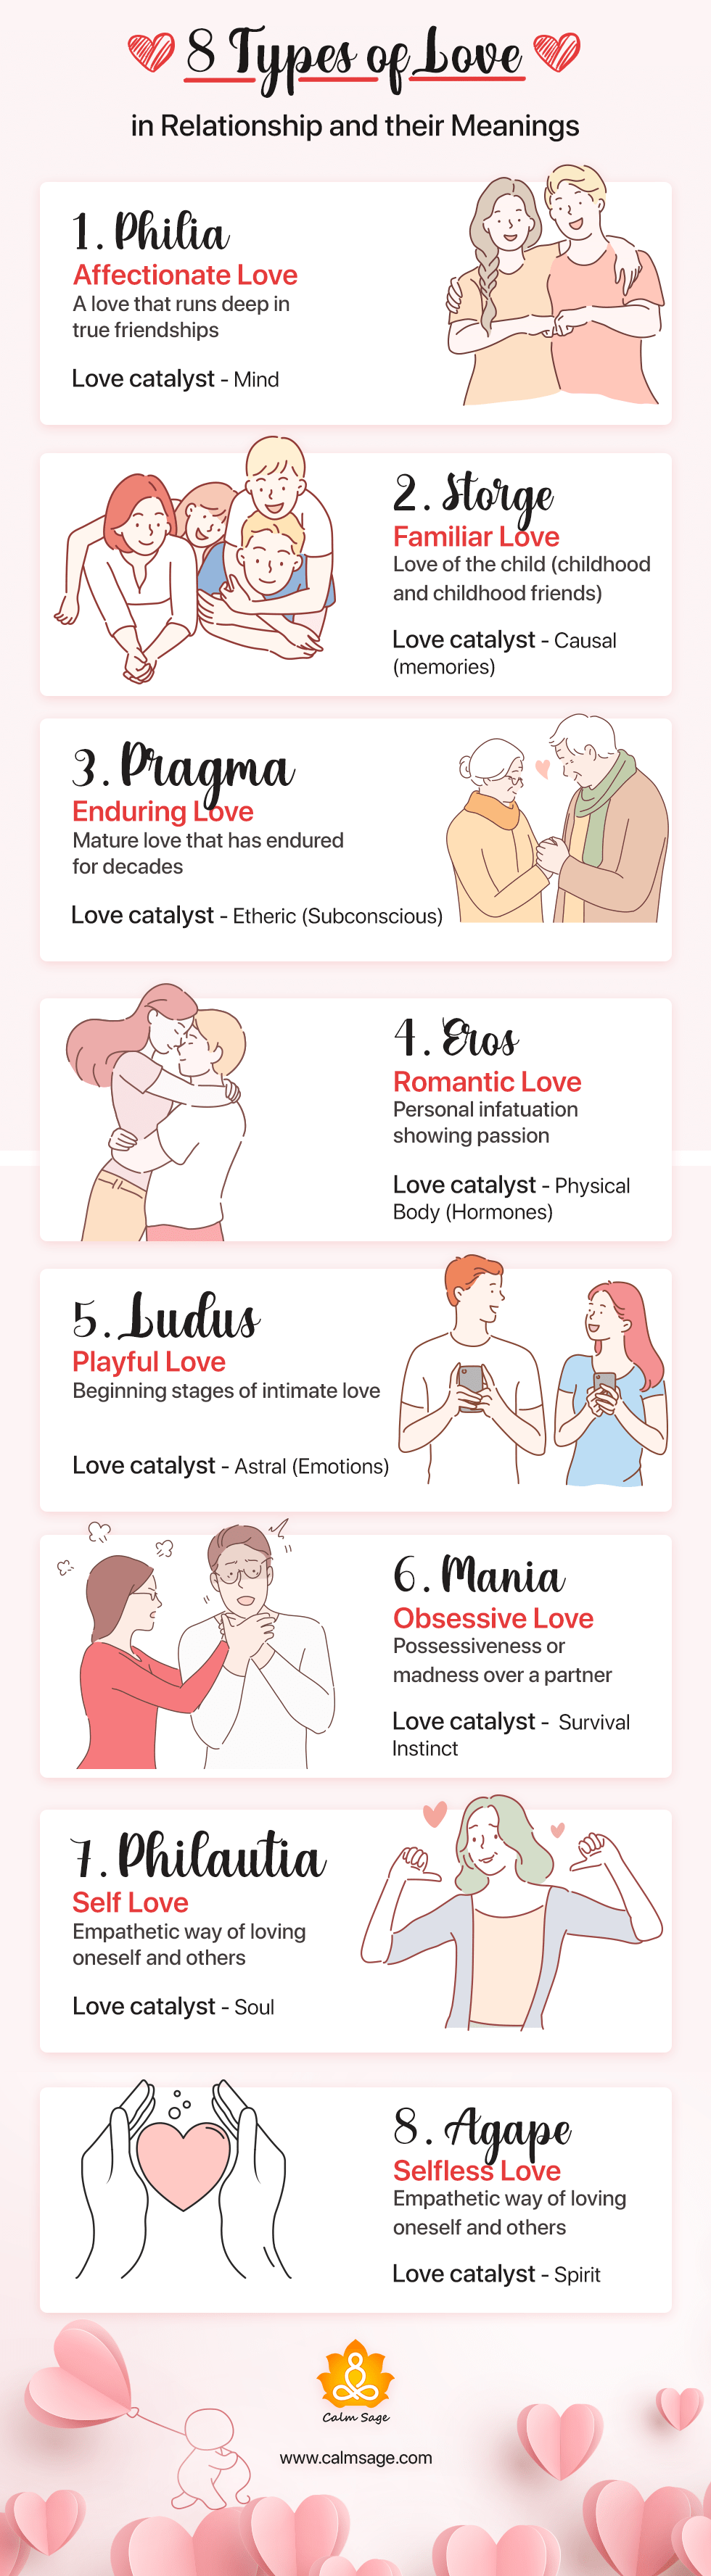 the 4 types of love